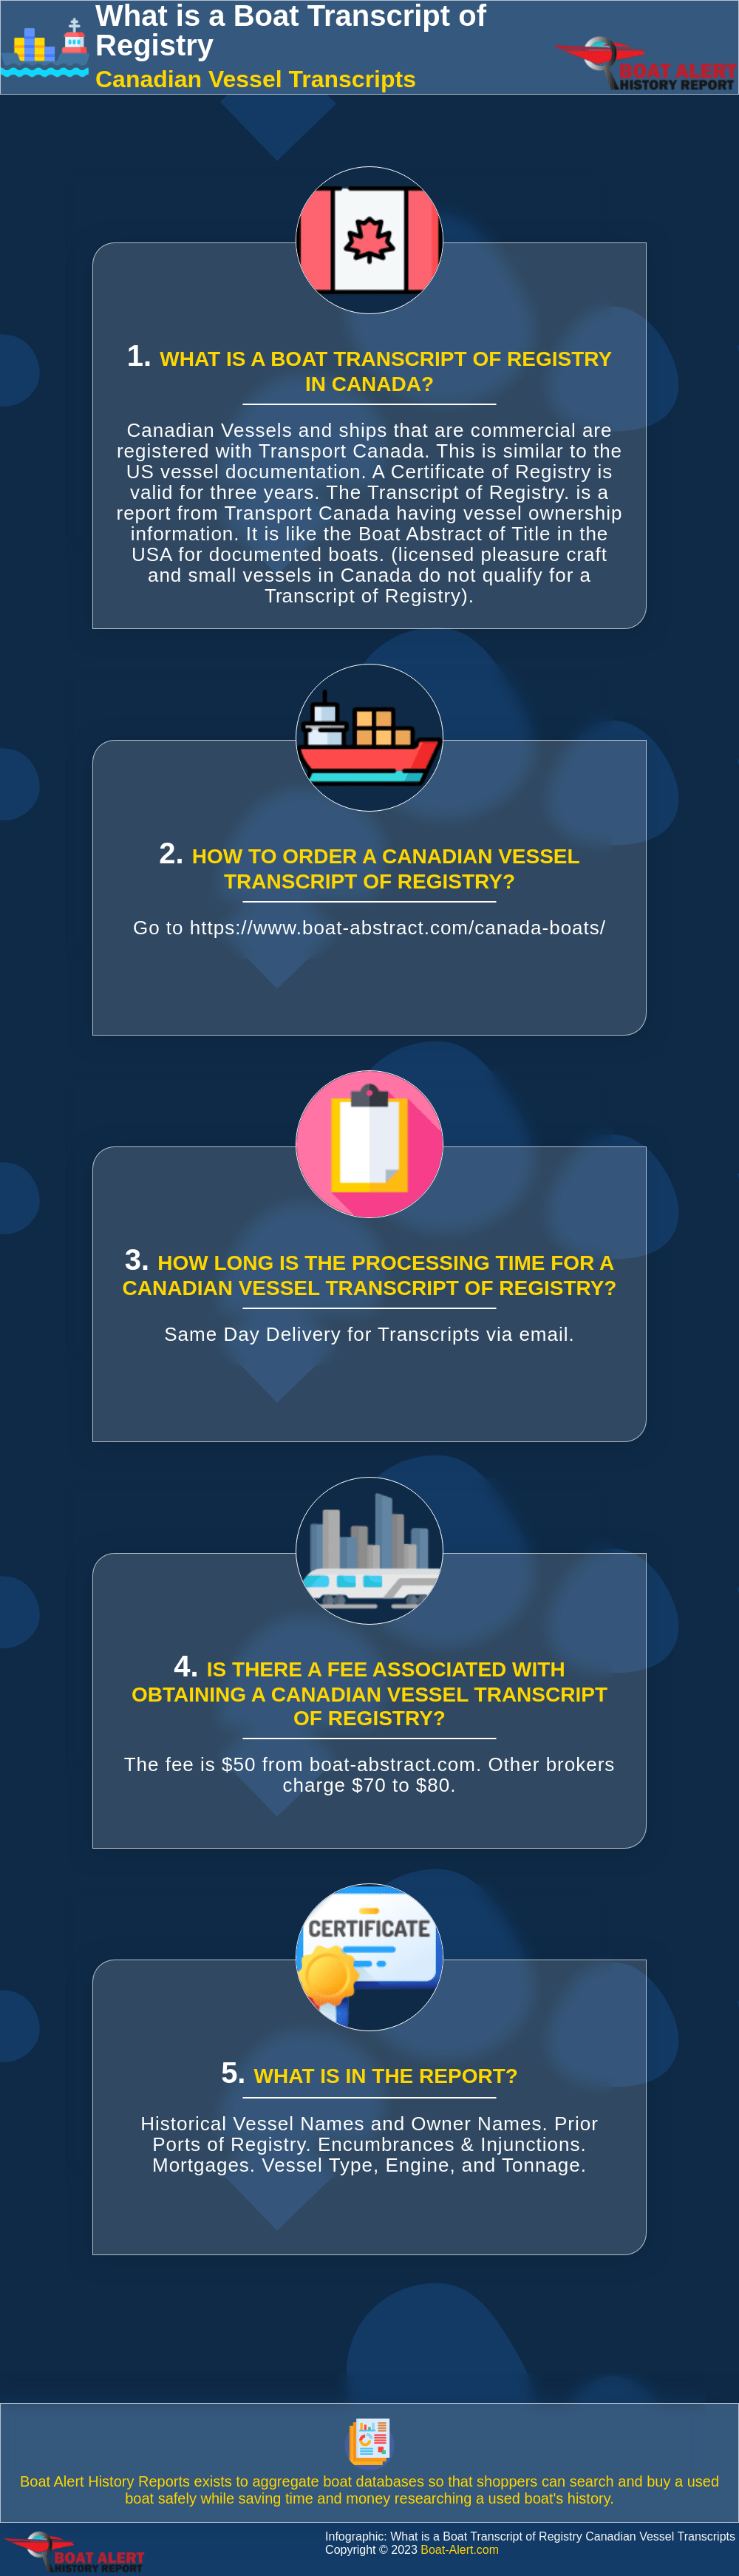 Infographic - What is a Boat Transcript of Registry in Canada